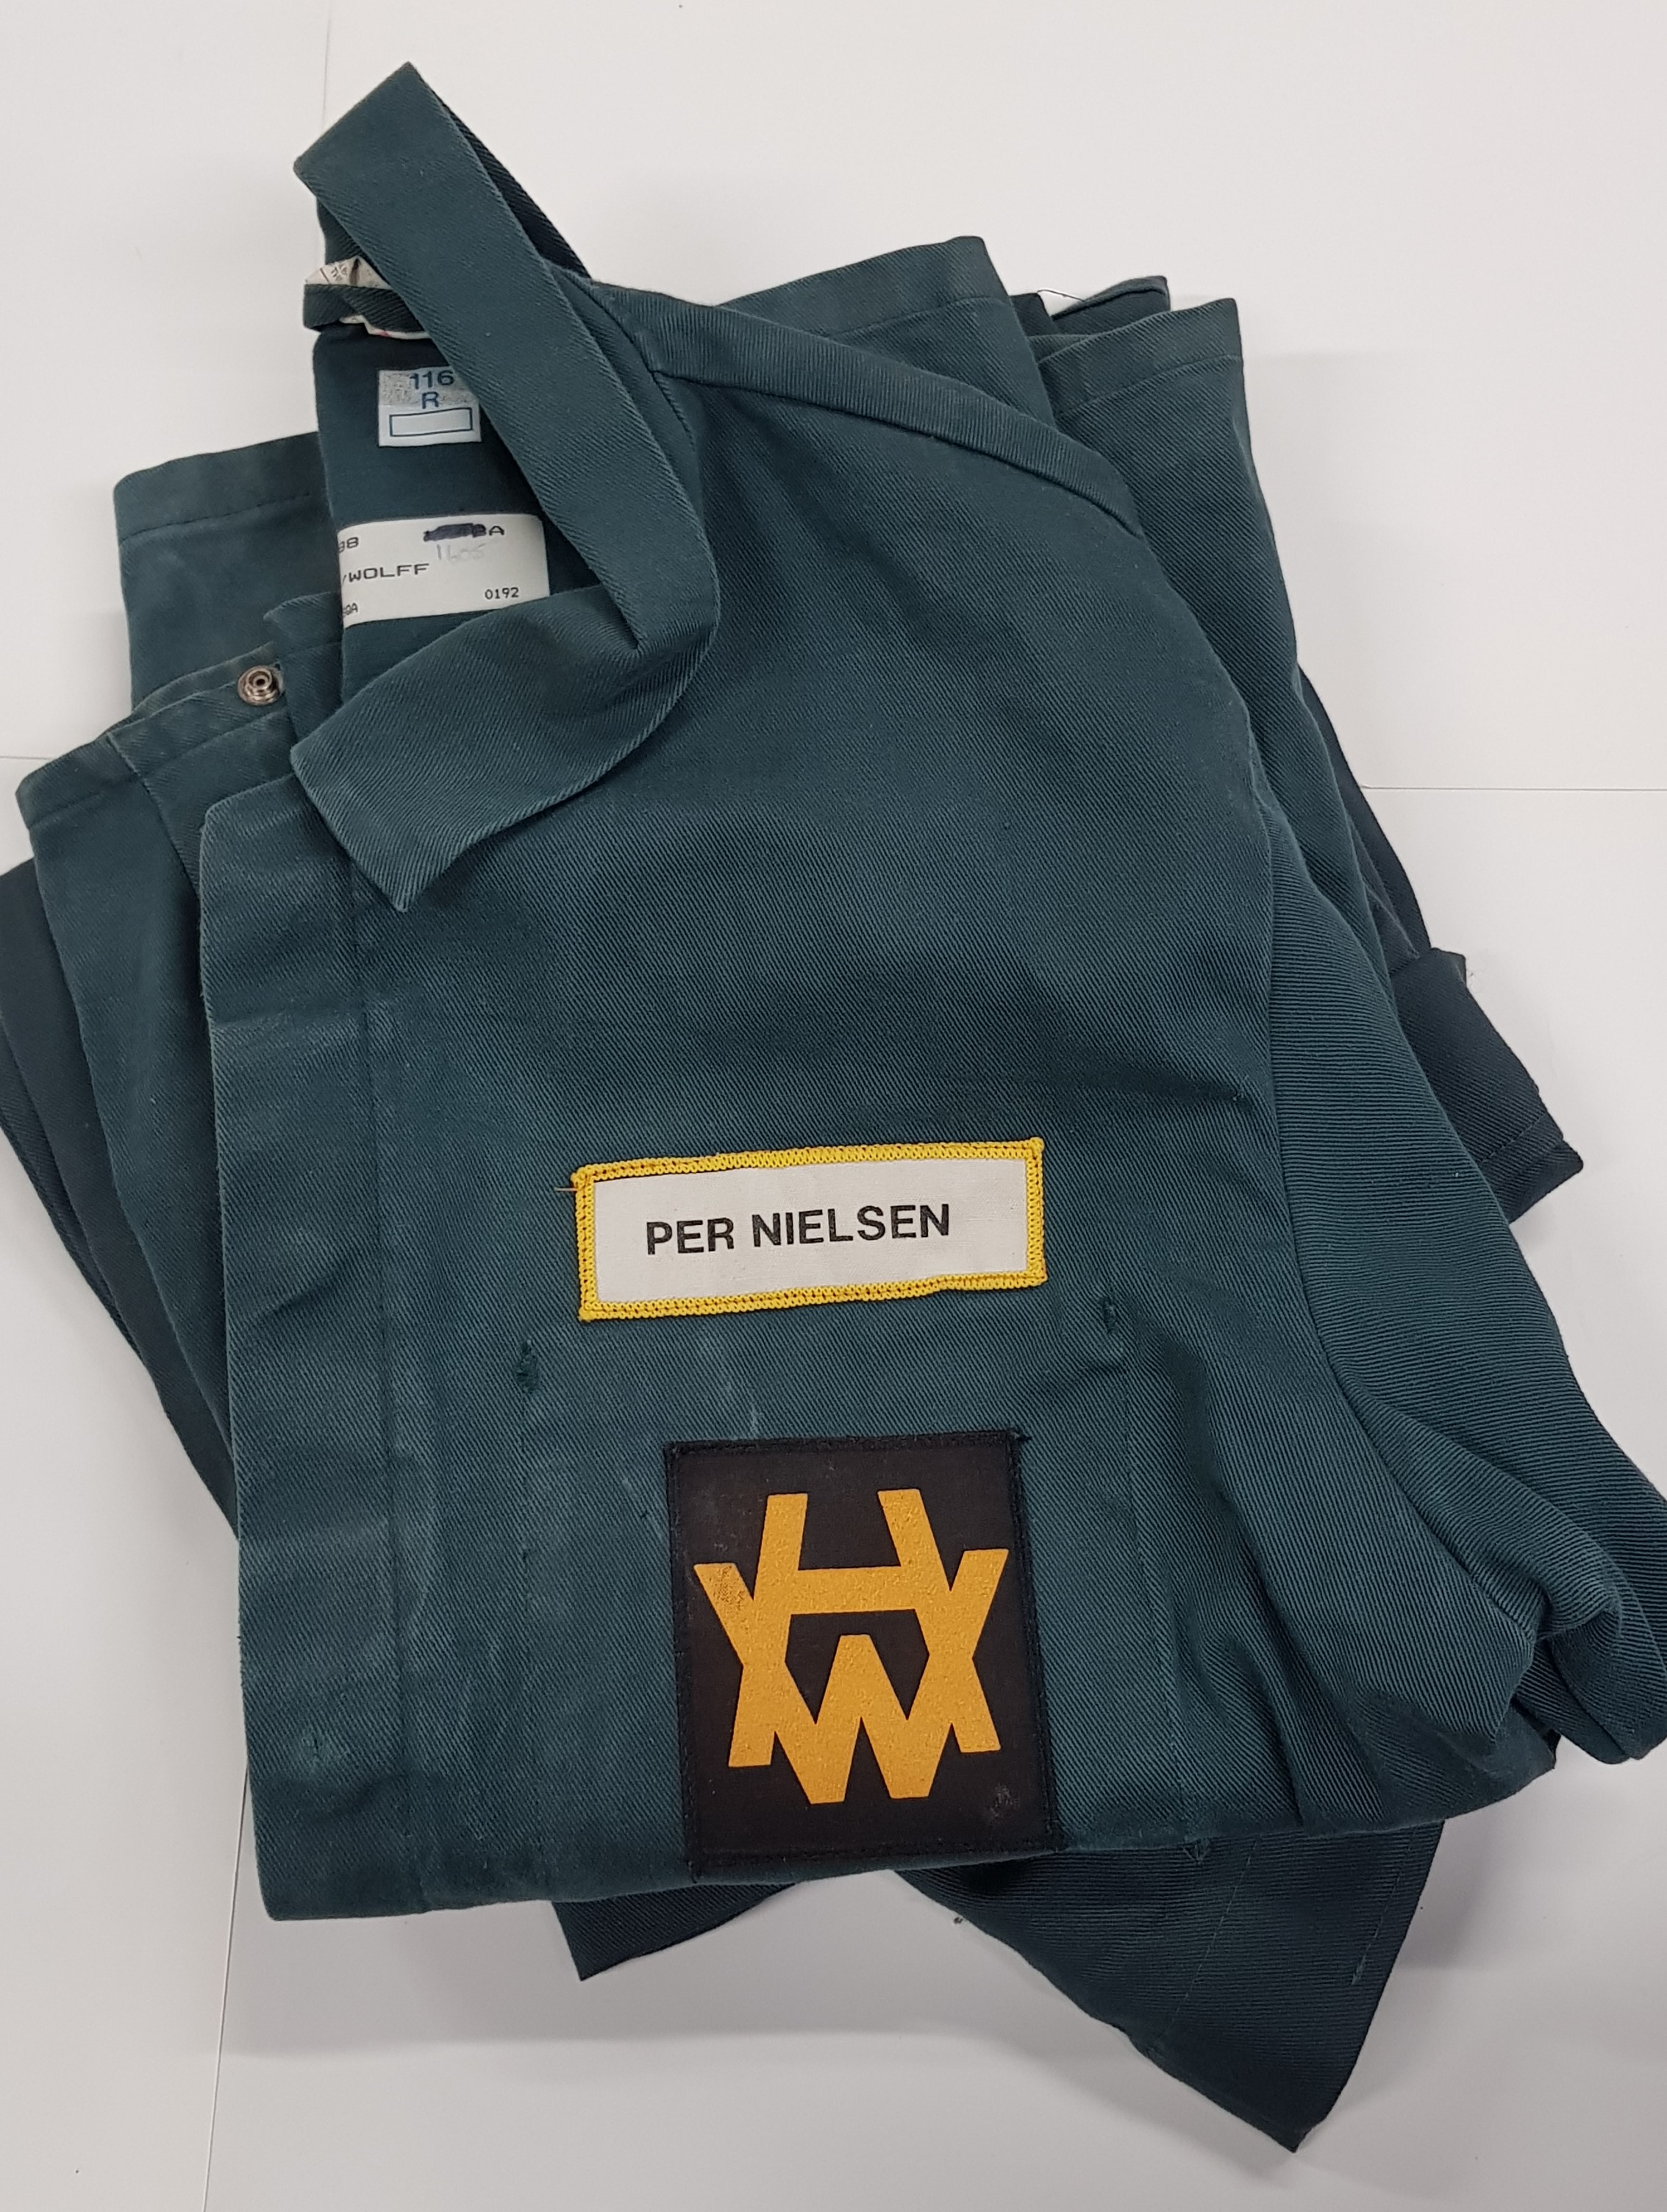 PAIR OF ORIGINAL HARLAND & WOLFF OVERALLS OWNED BY PIER NIELSEN